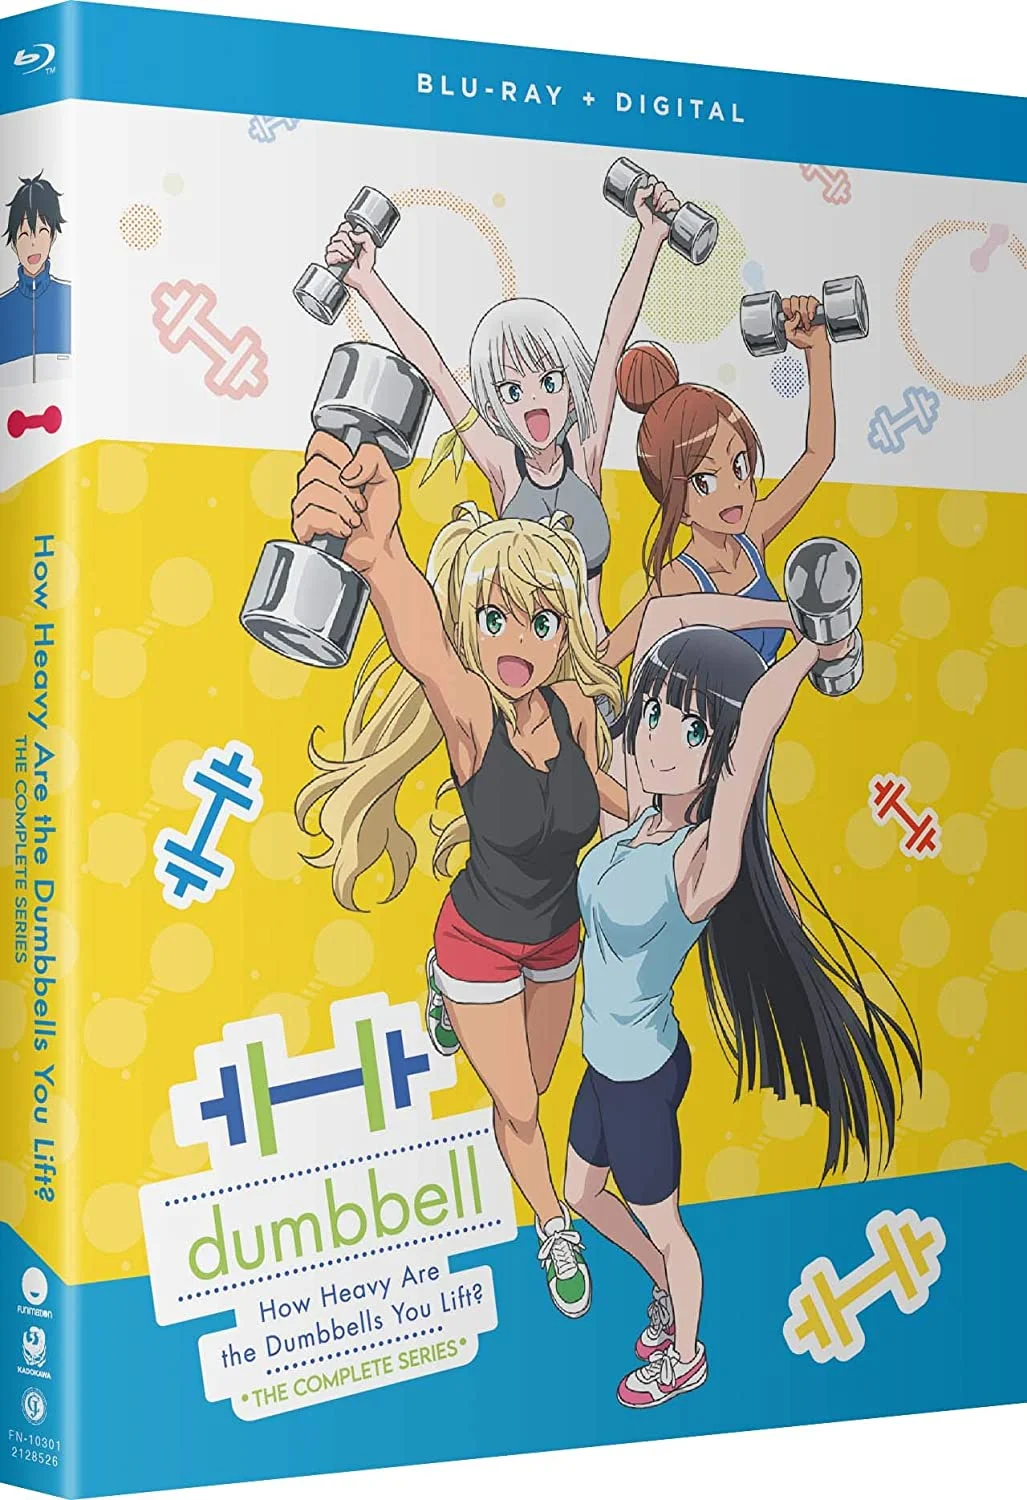 How Heavy Are the Dumbbells You Lift? – The Complete Series (Blu-ray) on MovieShack